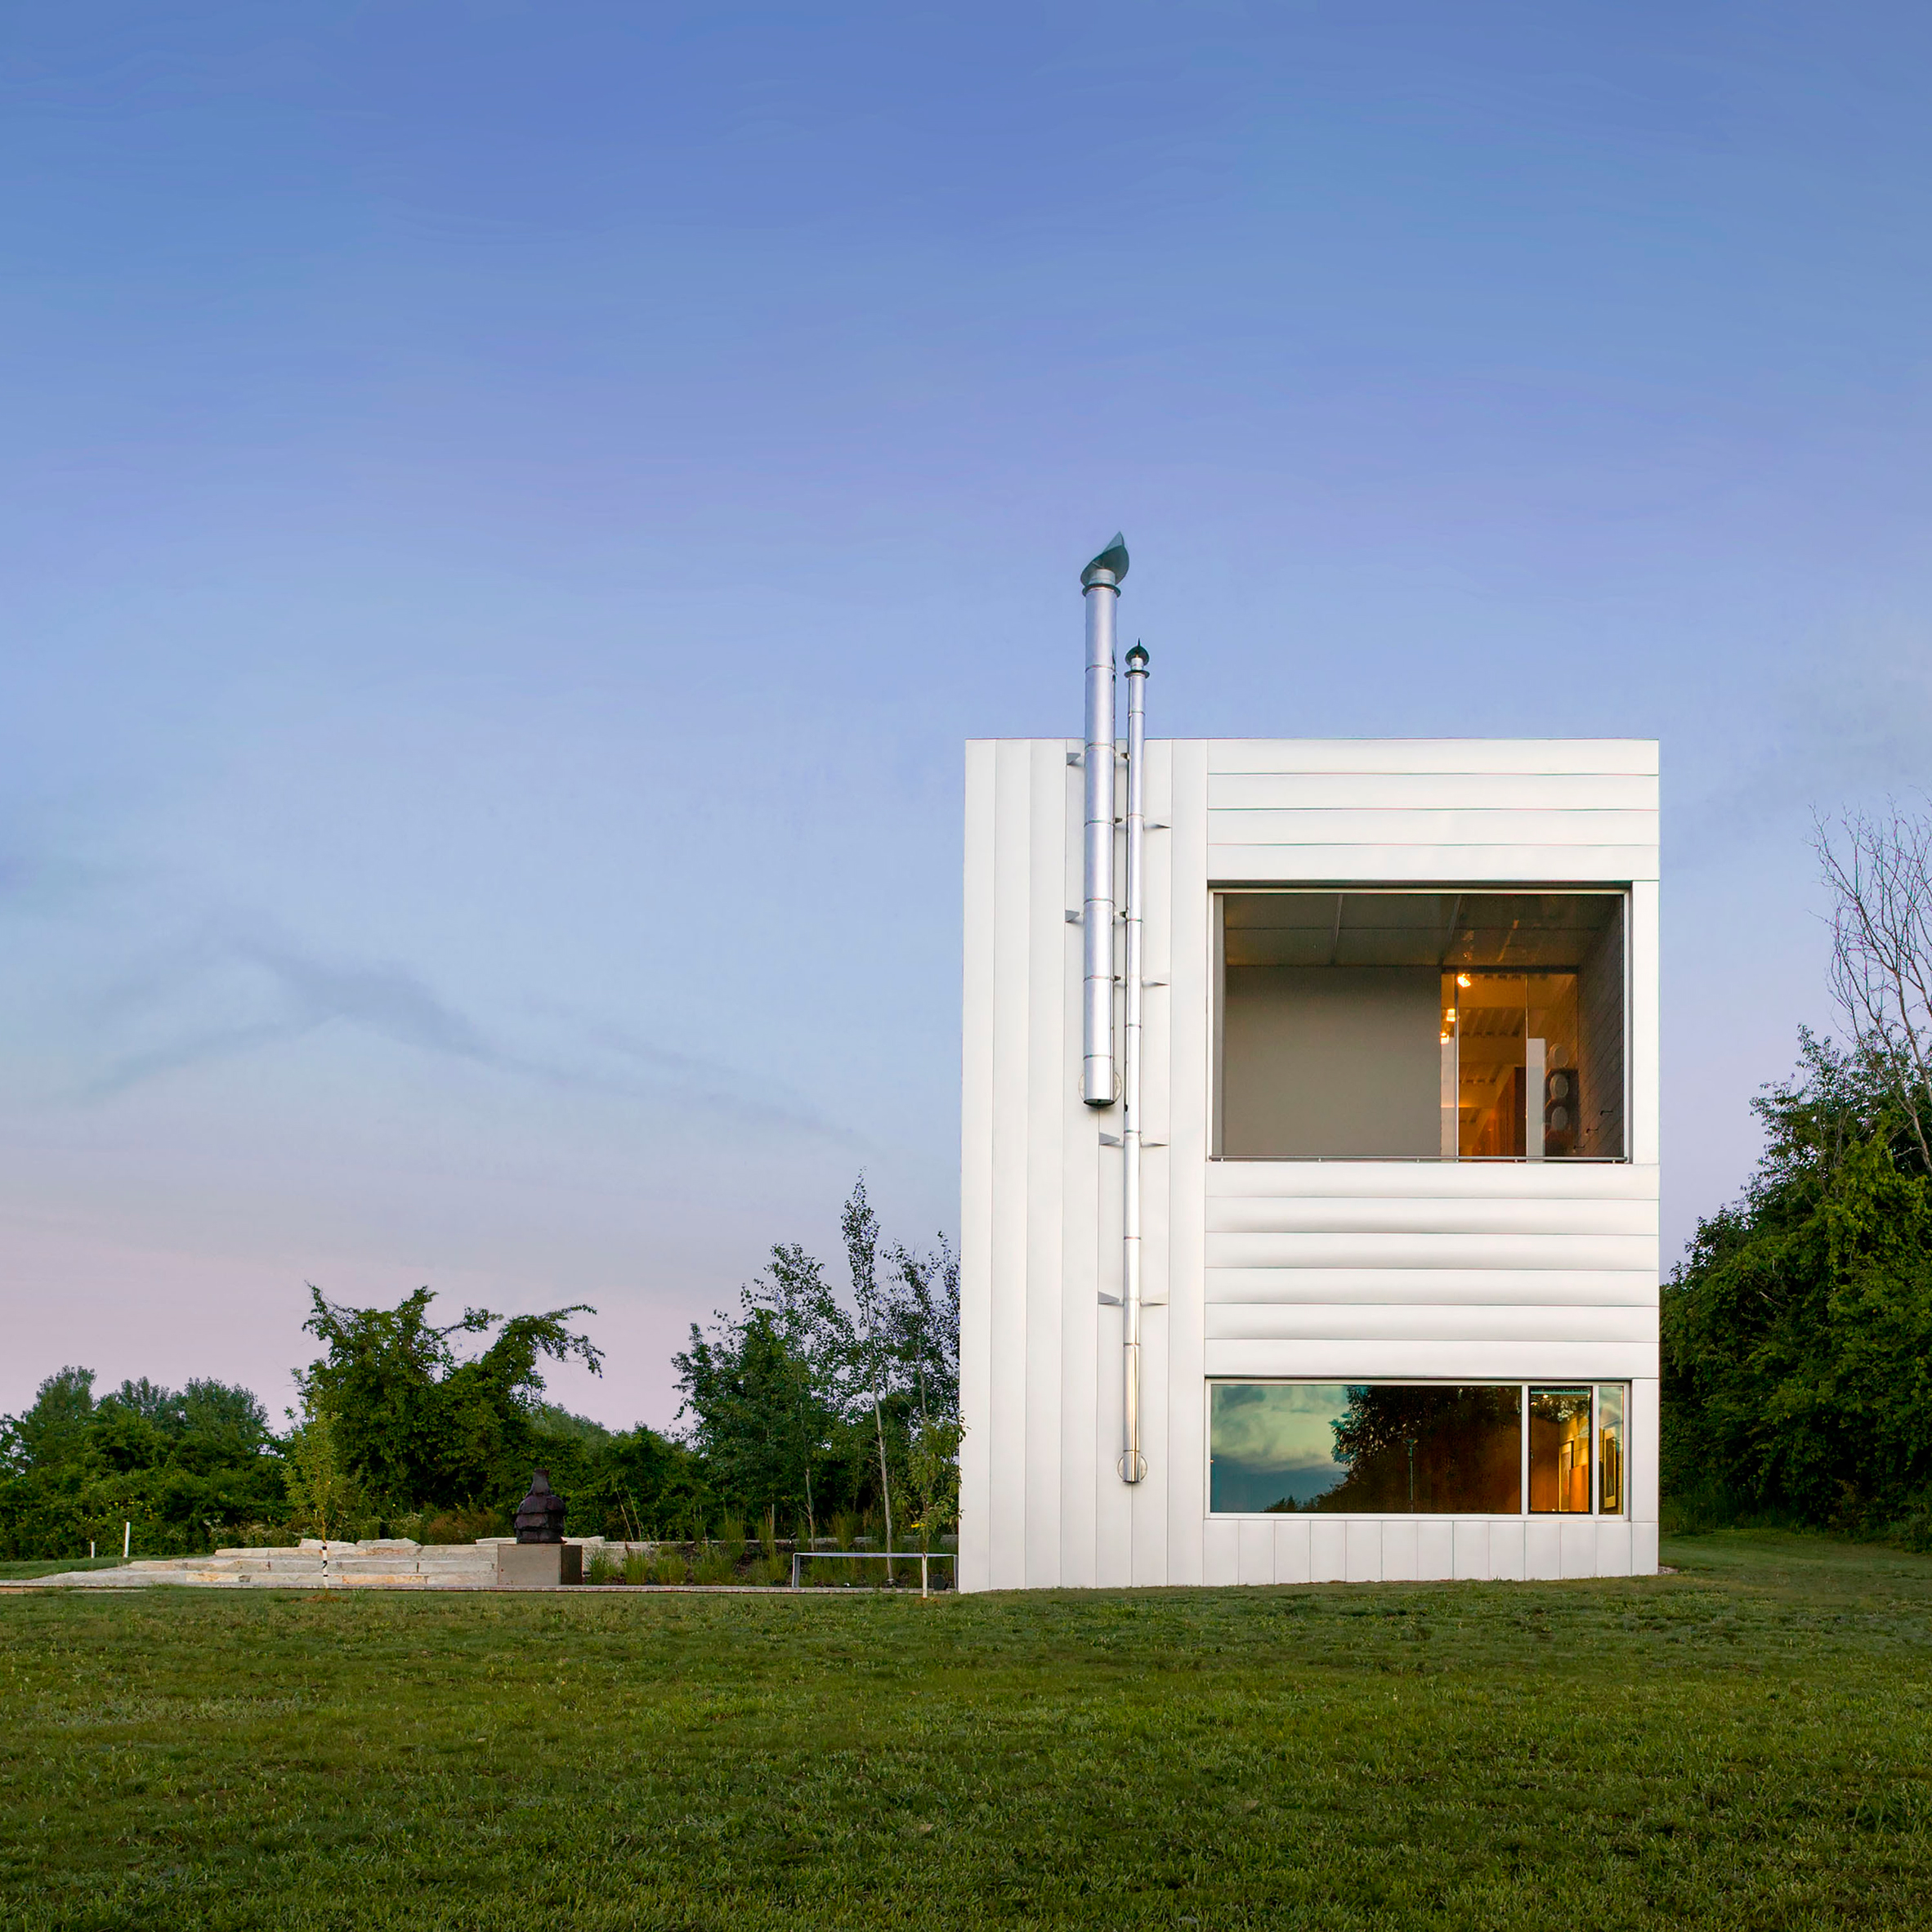 Field House by Wendell Burnette Architects features on this week's Dezeen Mail